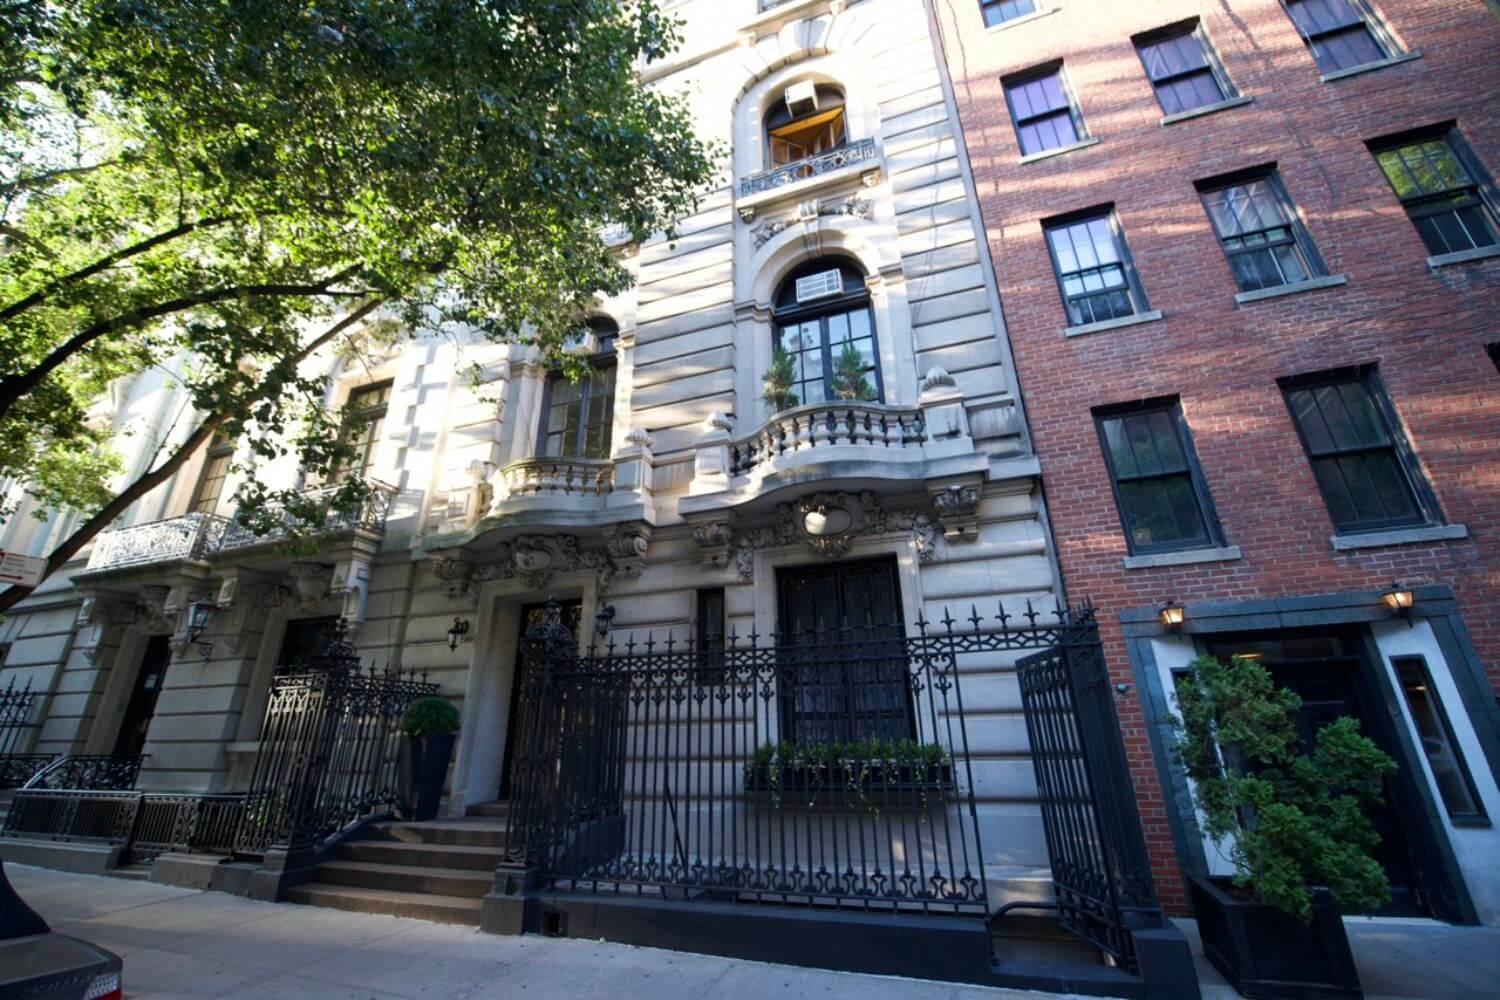 7 East 75th Street - Photo credit: Fantrippers